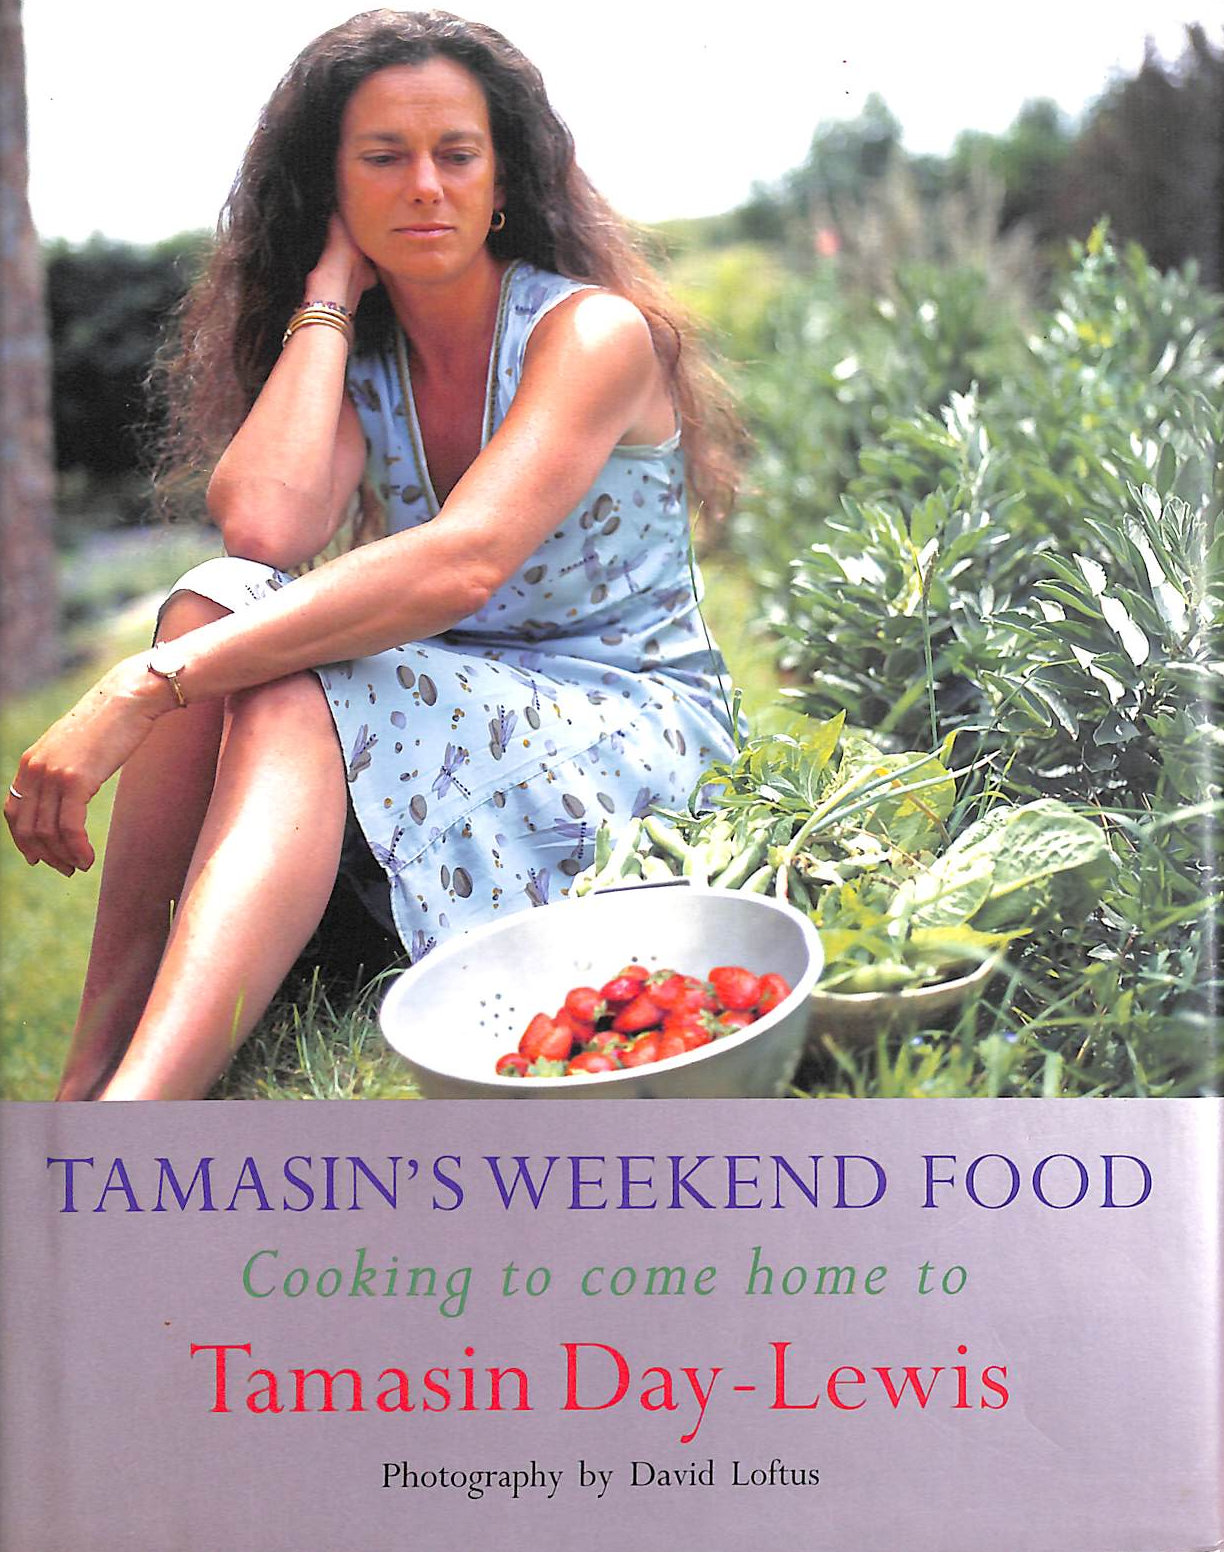 DAY-LEWIS, TAMASIN - Tamasin's Weekend Food: Cooking To Come Home To